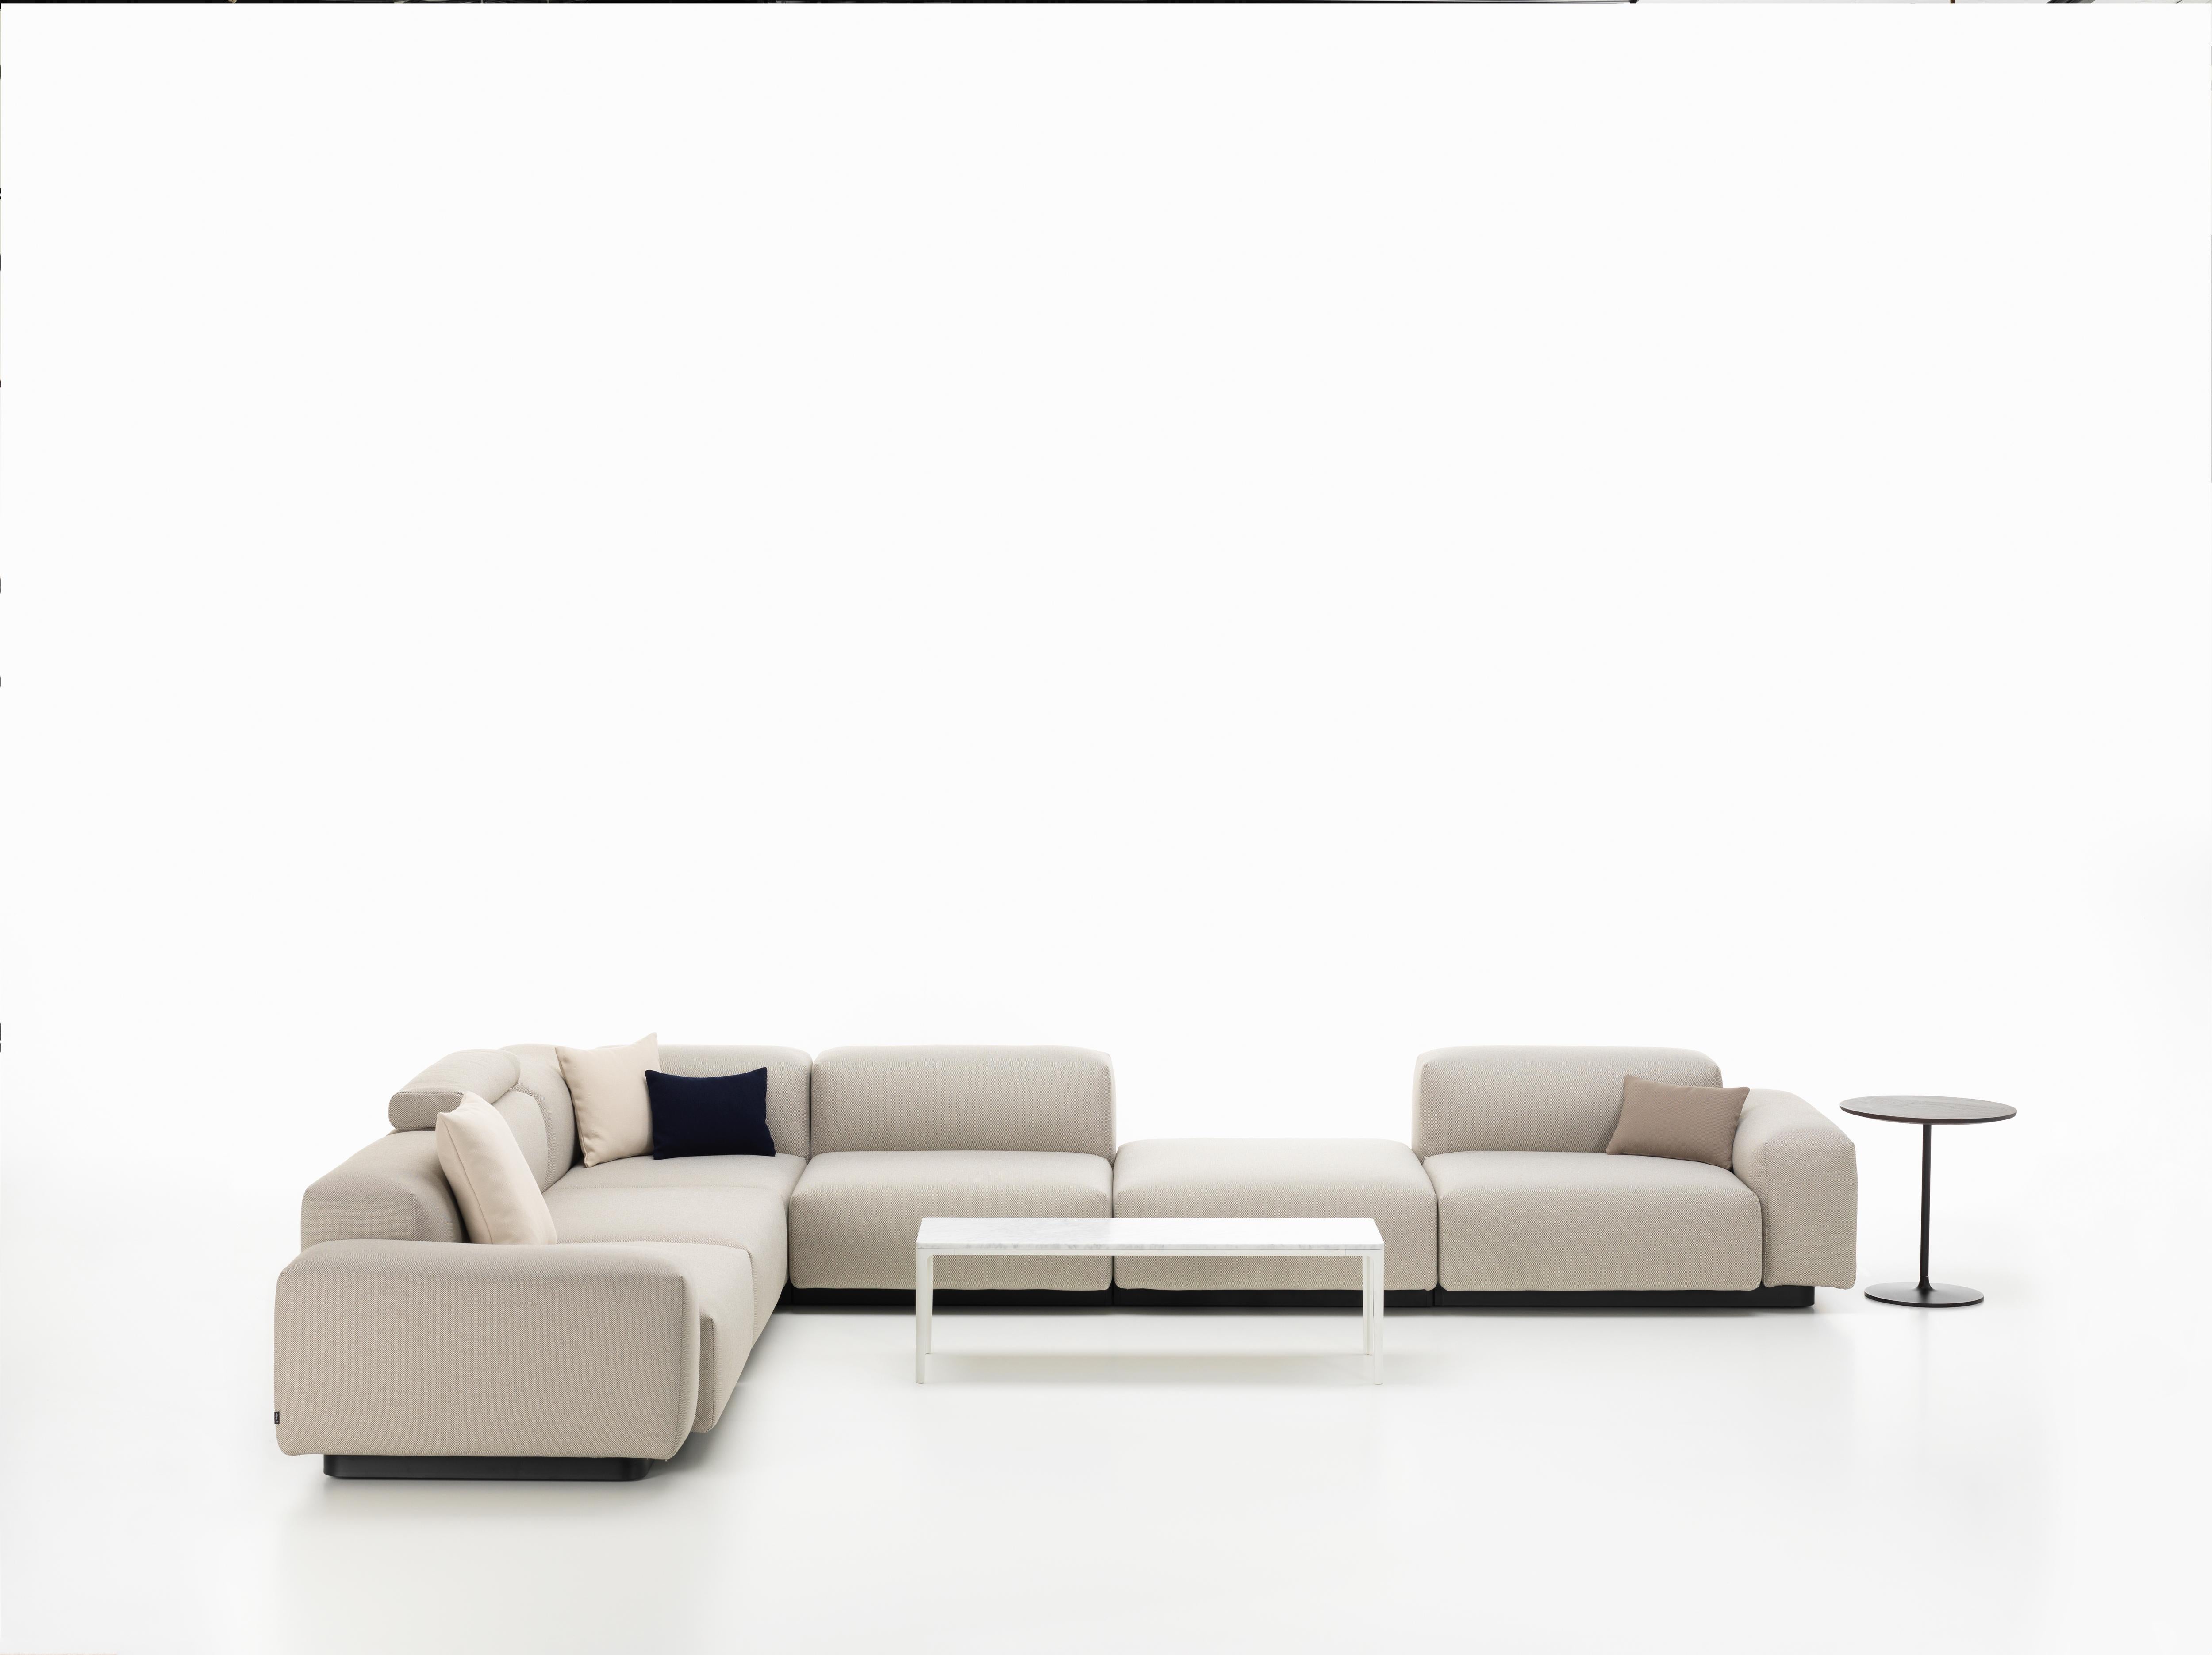 These items are only available in the United States.

The soft modular sofa is Jasper Morrison‘s updated interpretation of what has become a modern classic: the low-slung modular sofa with a decidedly horizontal emphasis. Uniting carefully